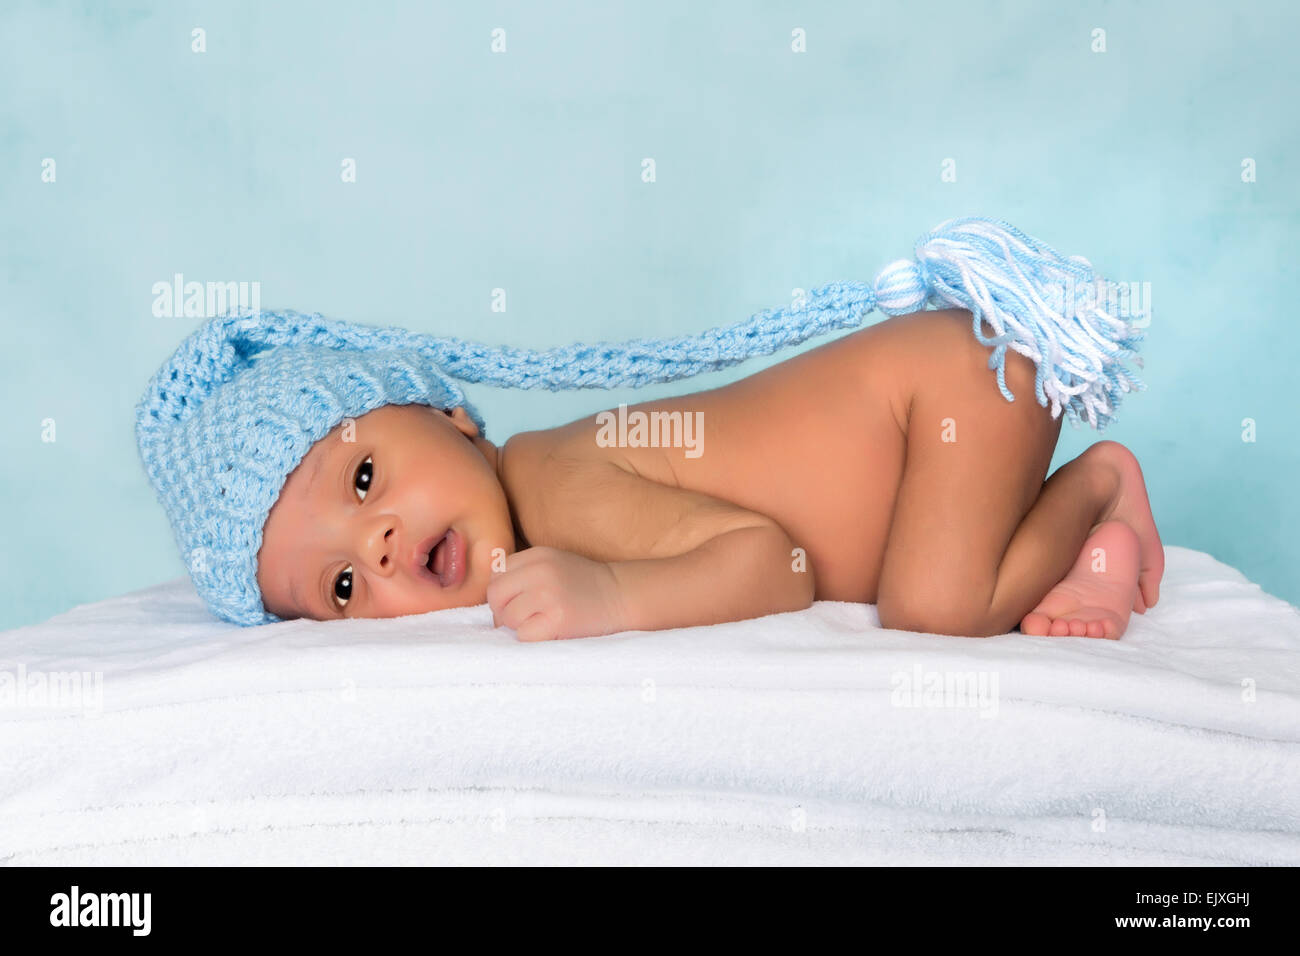 Adorable black baby awake with blue knitted hat Stock Photo